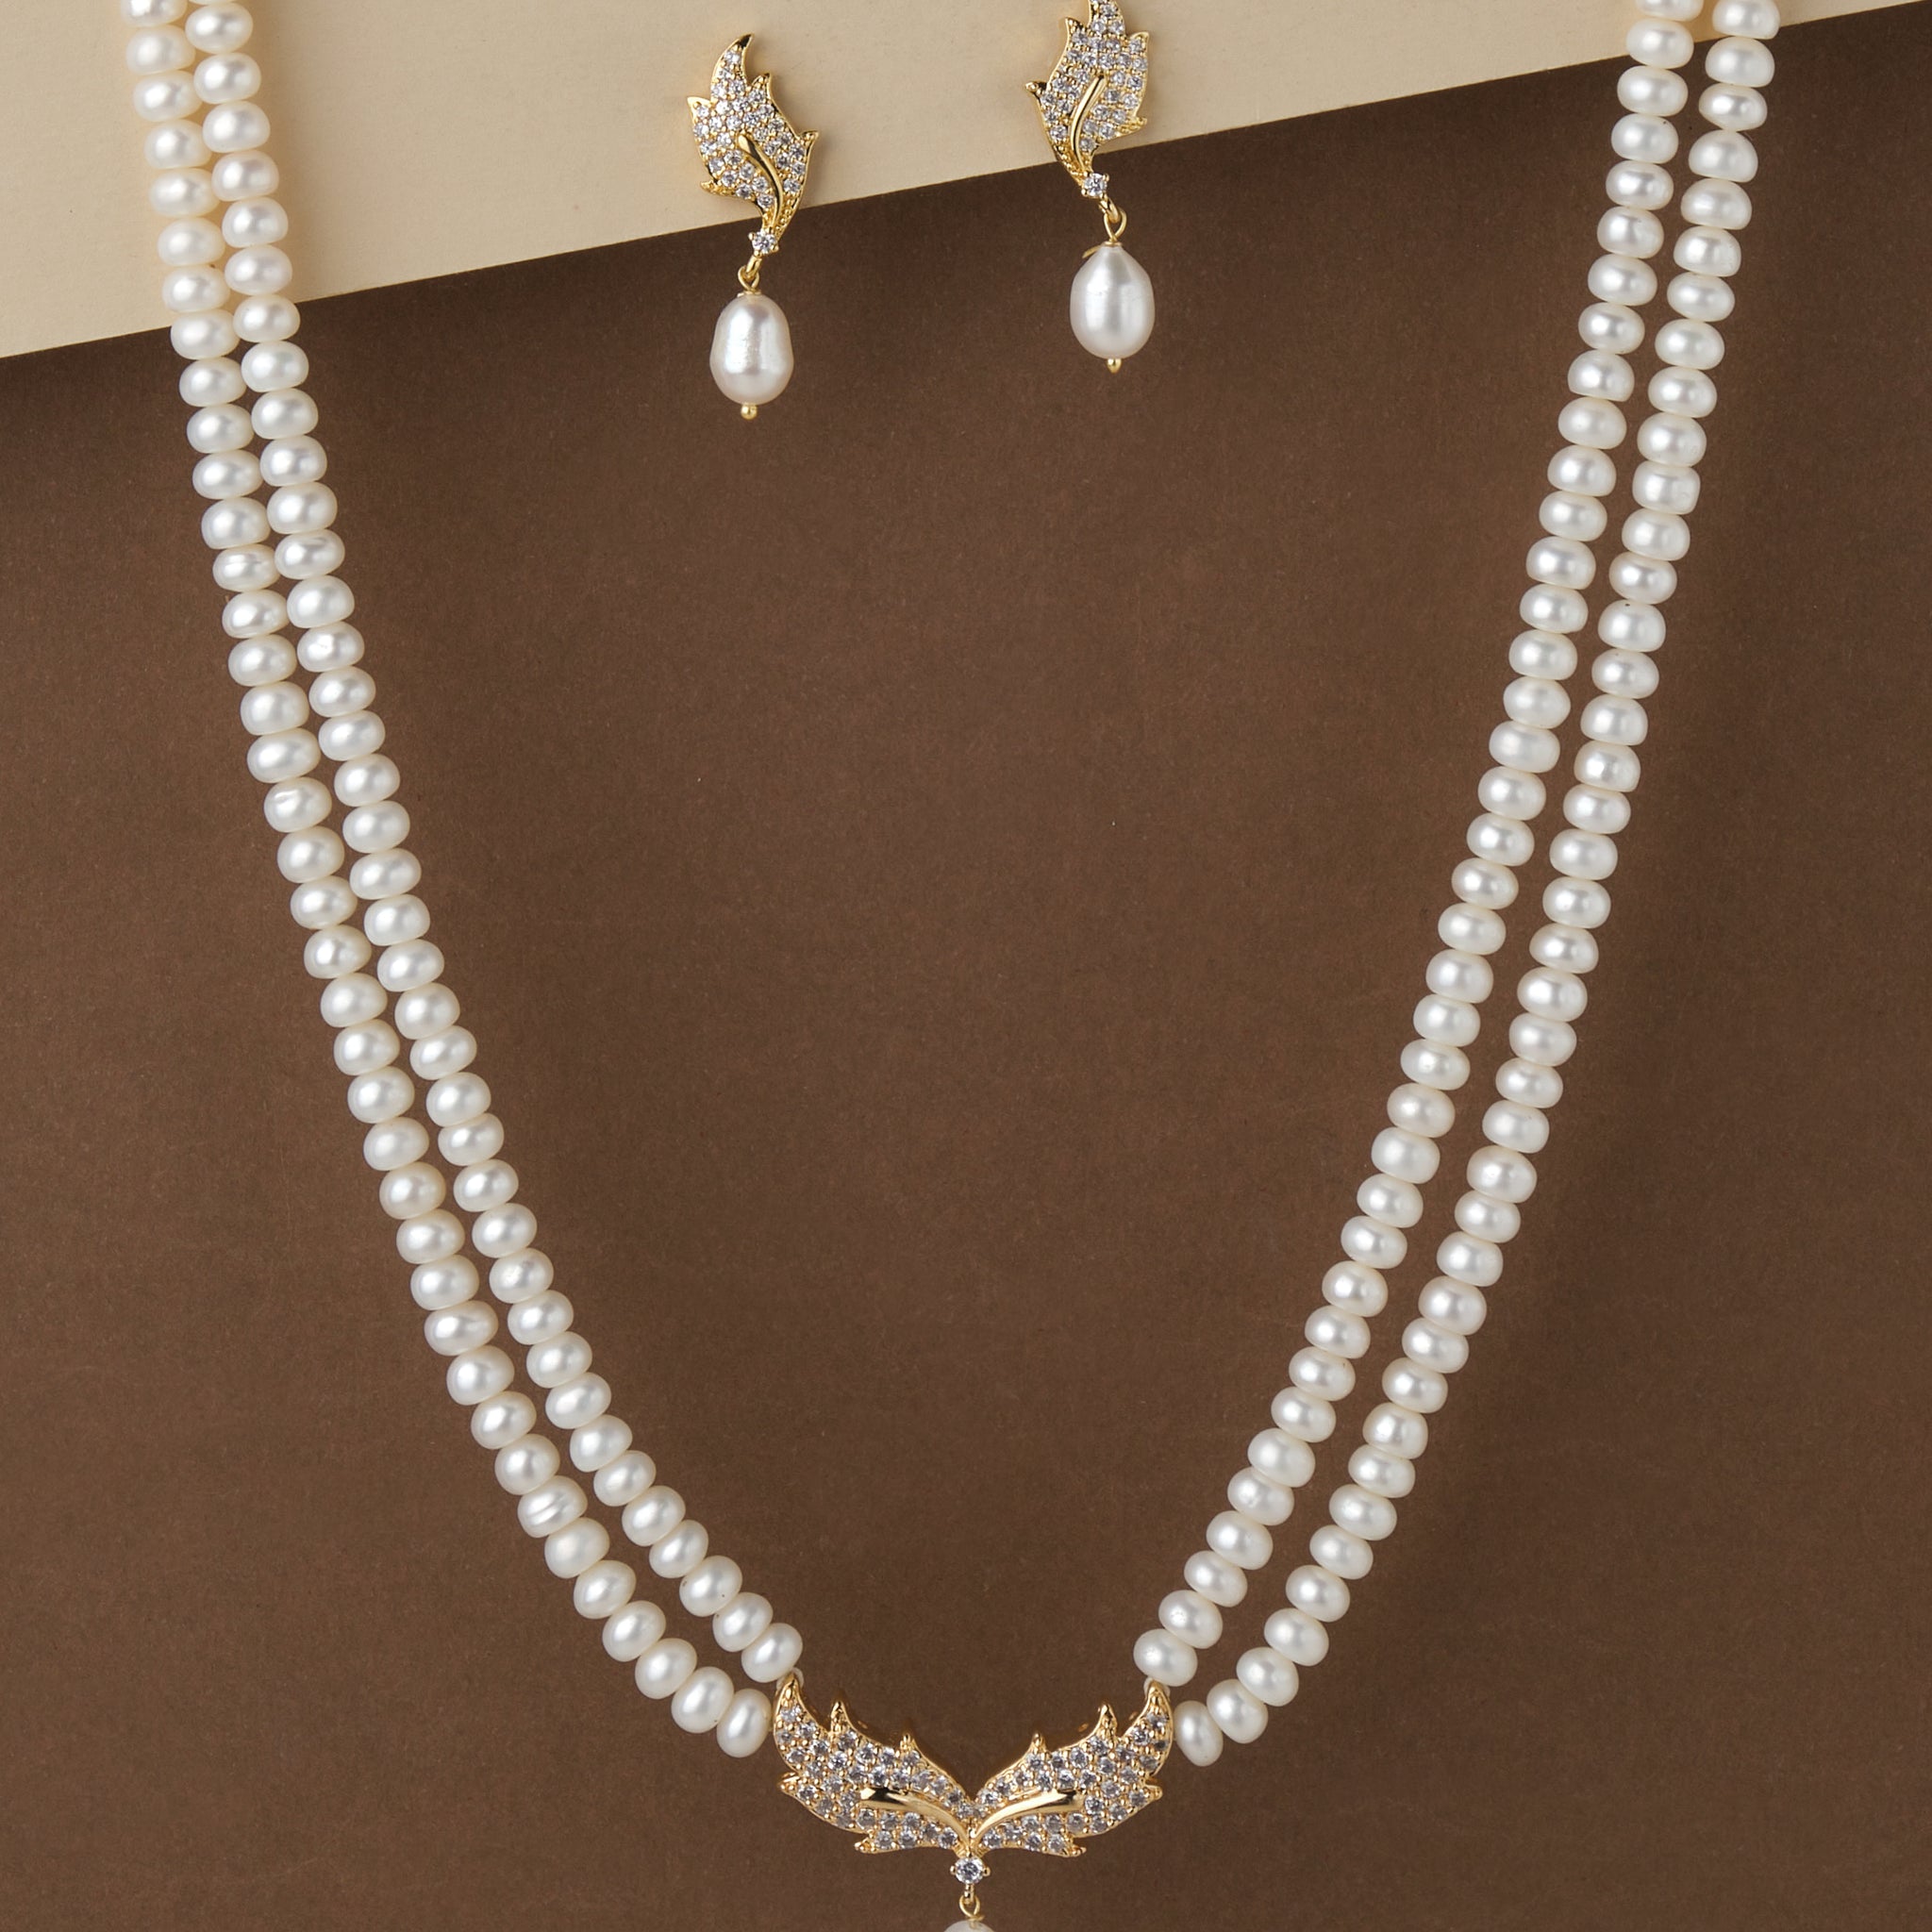 A Mesmerising Leafy Pearl Necklace and earring set from Chandrani Pearls.